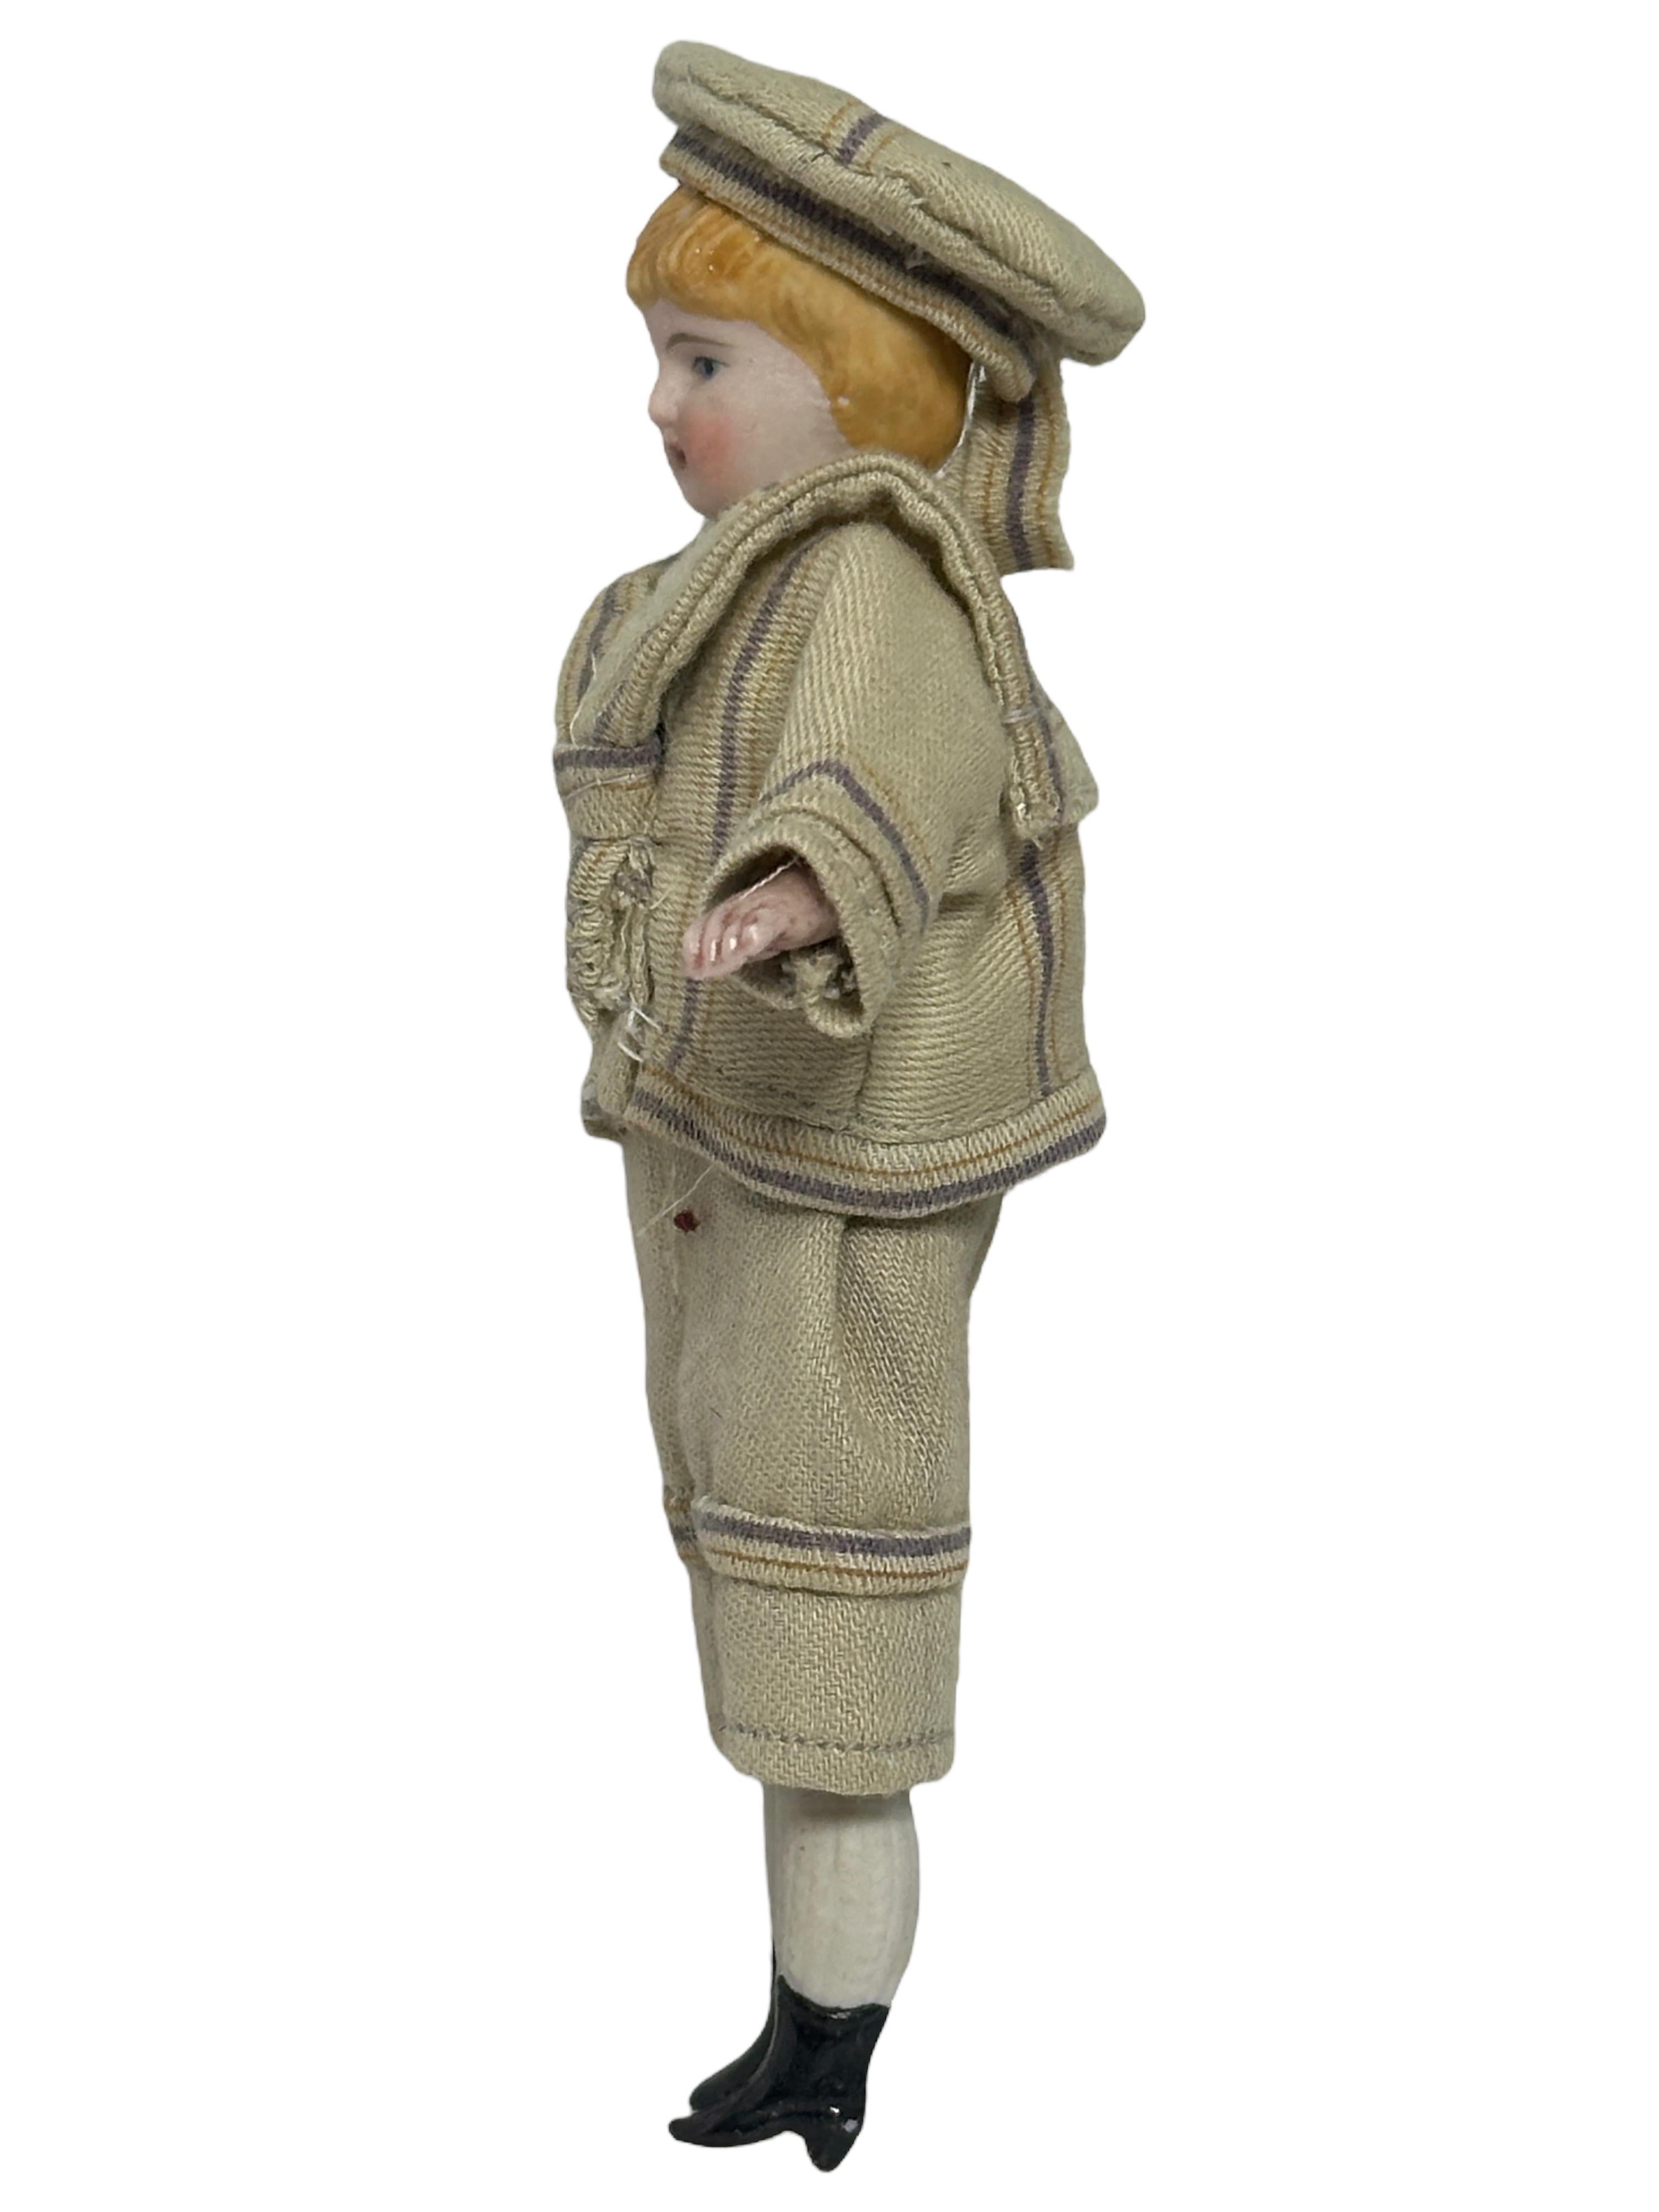 This rare and exquisite miniature antique German Bisque Head, Arms and Leg Doll is a must-have for Dollhouse and Doll collectors and enthusiasts alike. With its beautiful Sailers Outfit, it is suitable for any room and adds a touch of elegance to